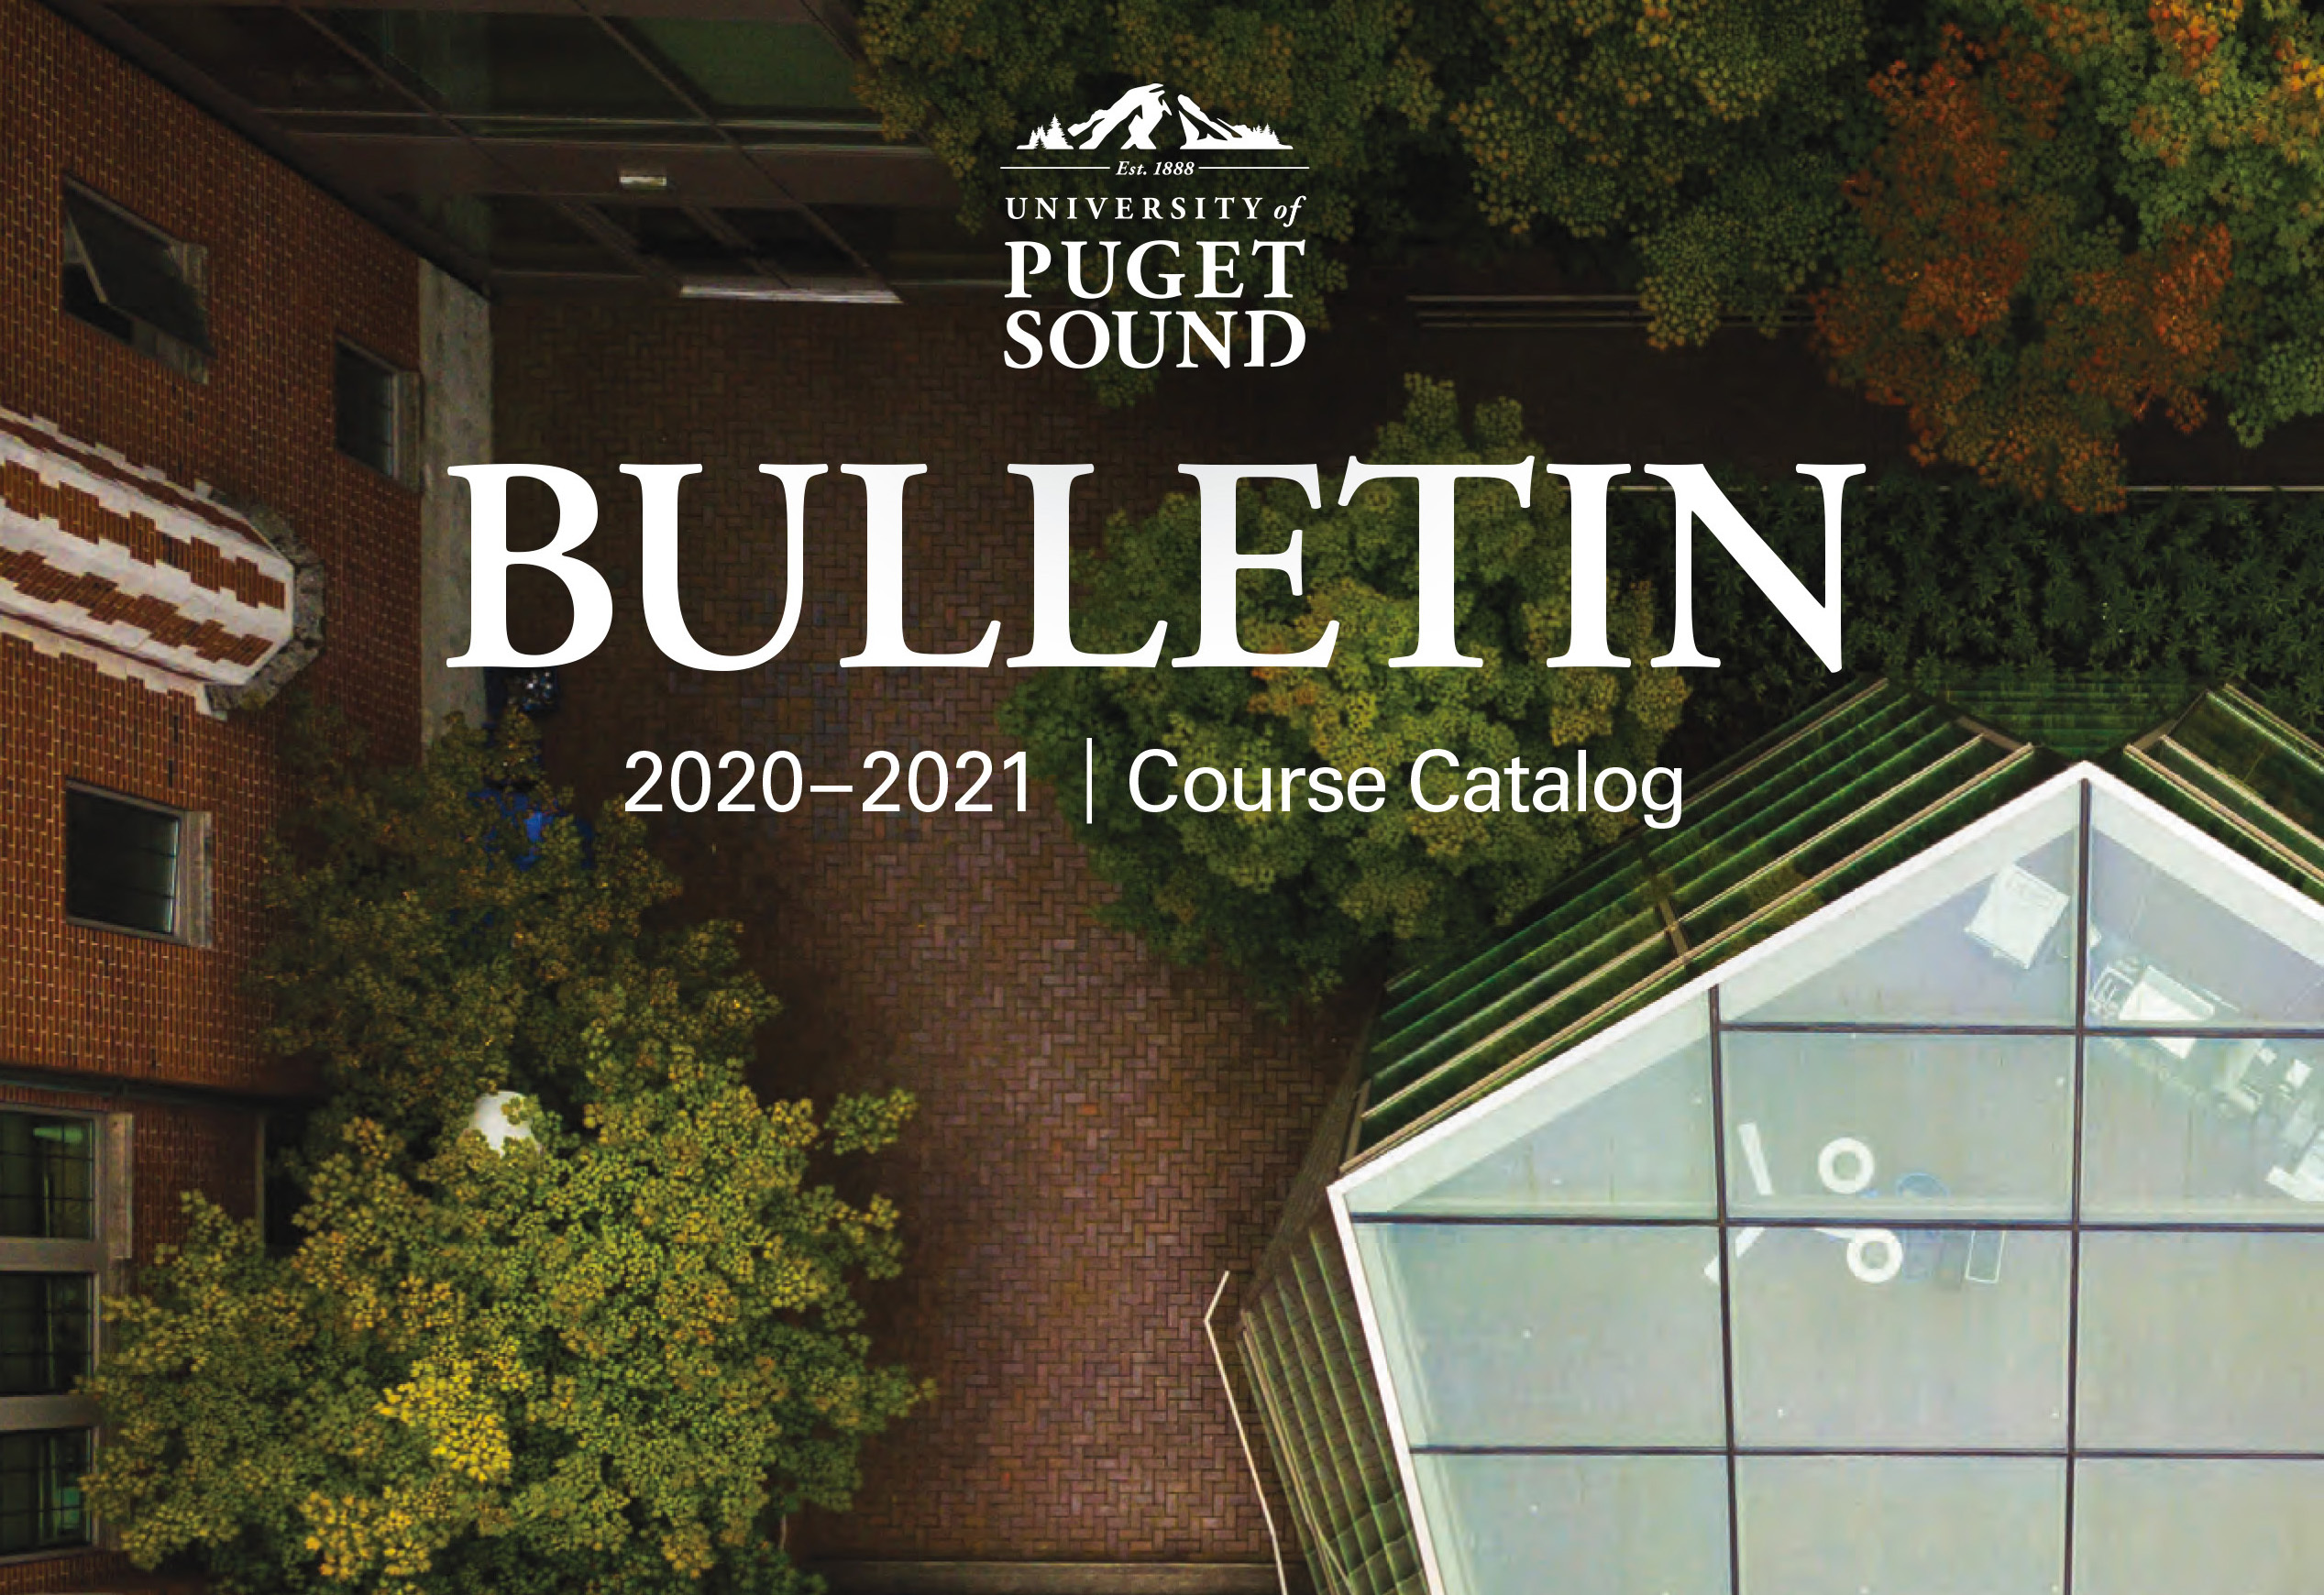 The cover of the Bulletin